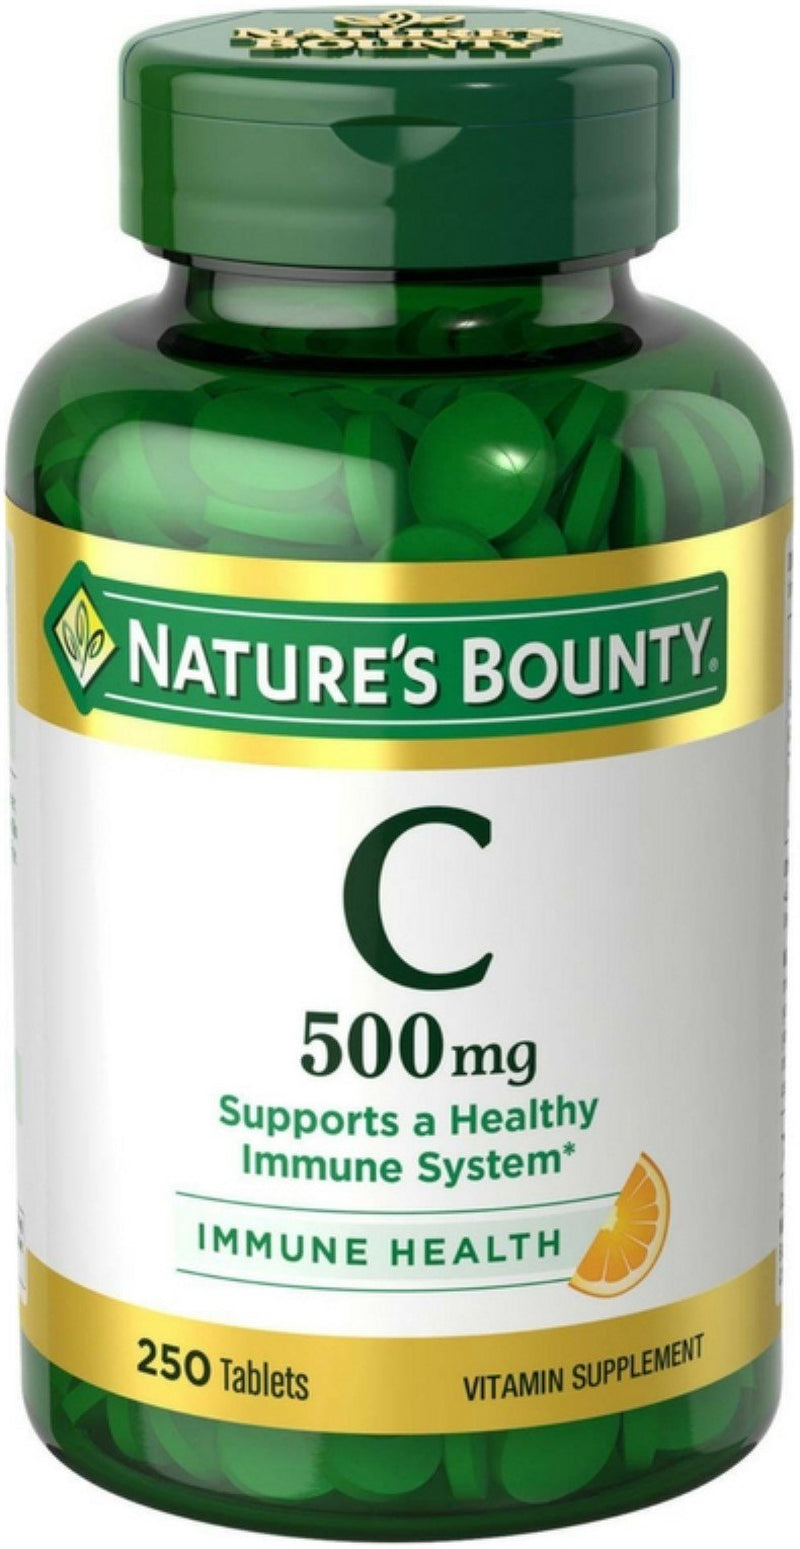 Nature'S Bounty Vitamin C 500 Mg, 250 Tablets (Pack of 3)